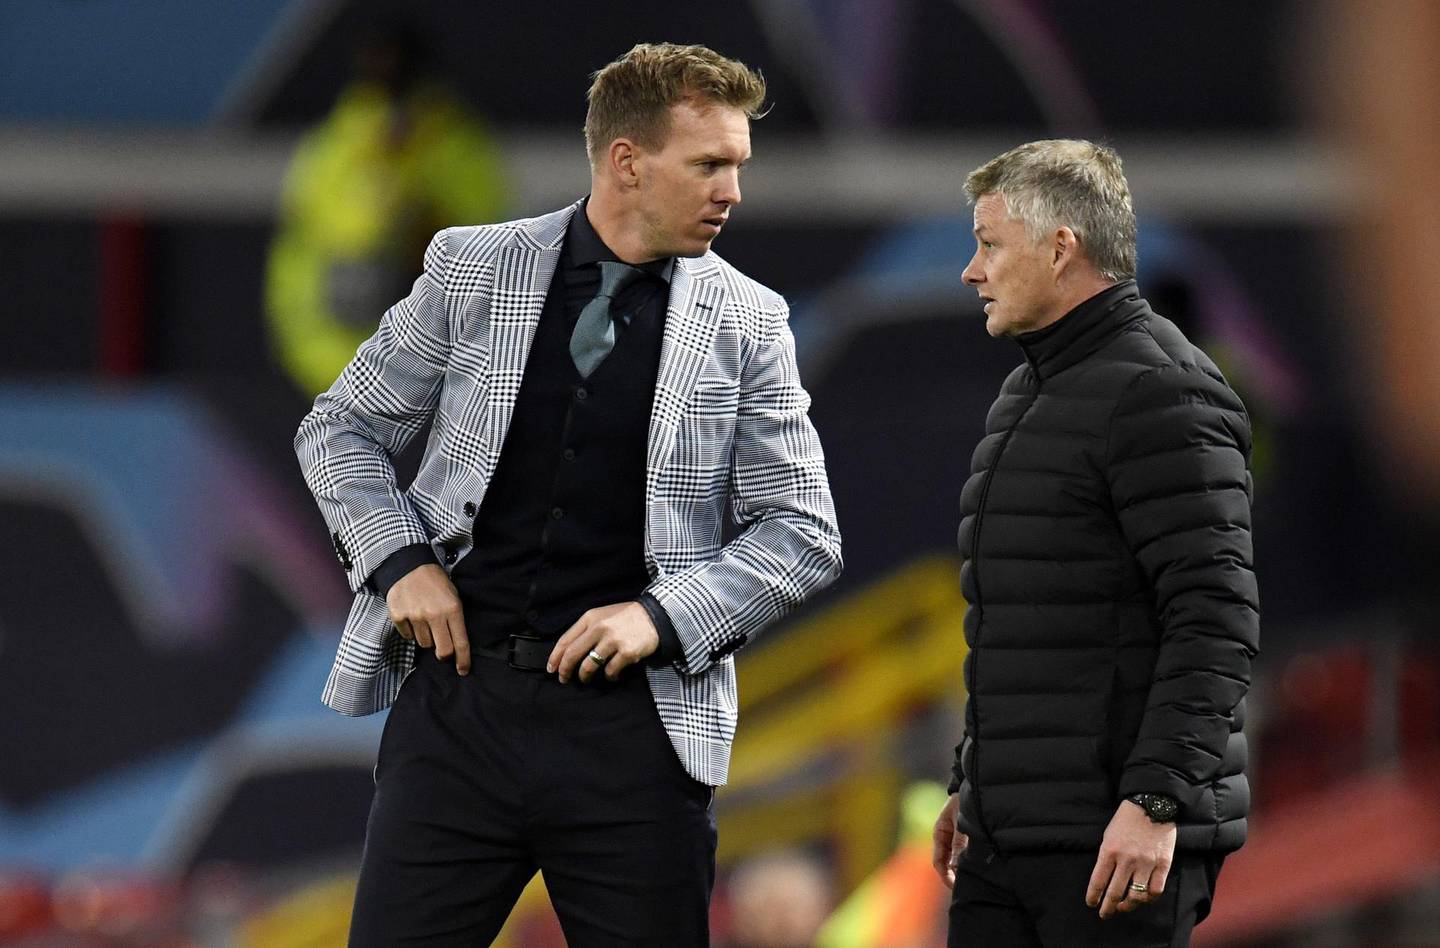 epa08782057 Manchester United manager Ole Gunnar Solskjaer (R) speaks with his RB Leipzig counterpart Julian Nagelsmann at the end of the UEFA Champions League group H match Manchester United vs RB Leipzig in Manchester, Britain 28 October 2020.  EPA/Peter Powell